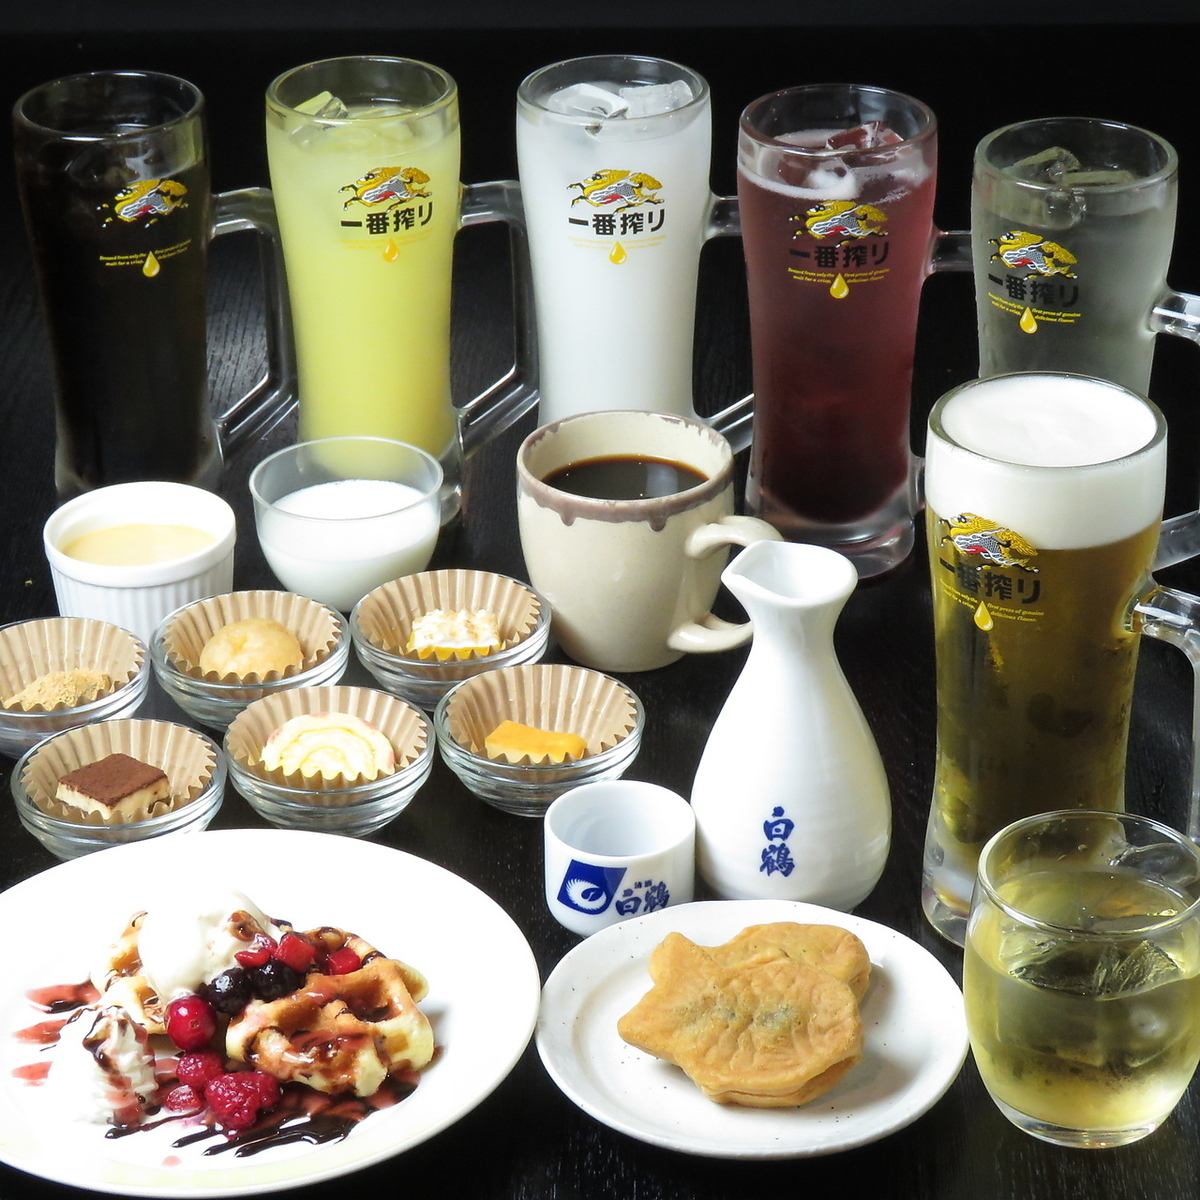 All-you-can-eat and all-you-can-drink alcohol for 1,100 yen!